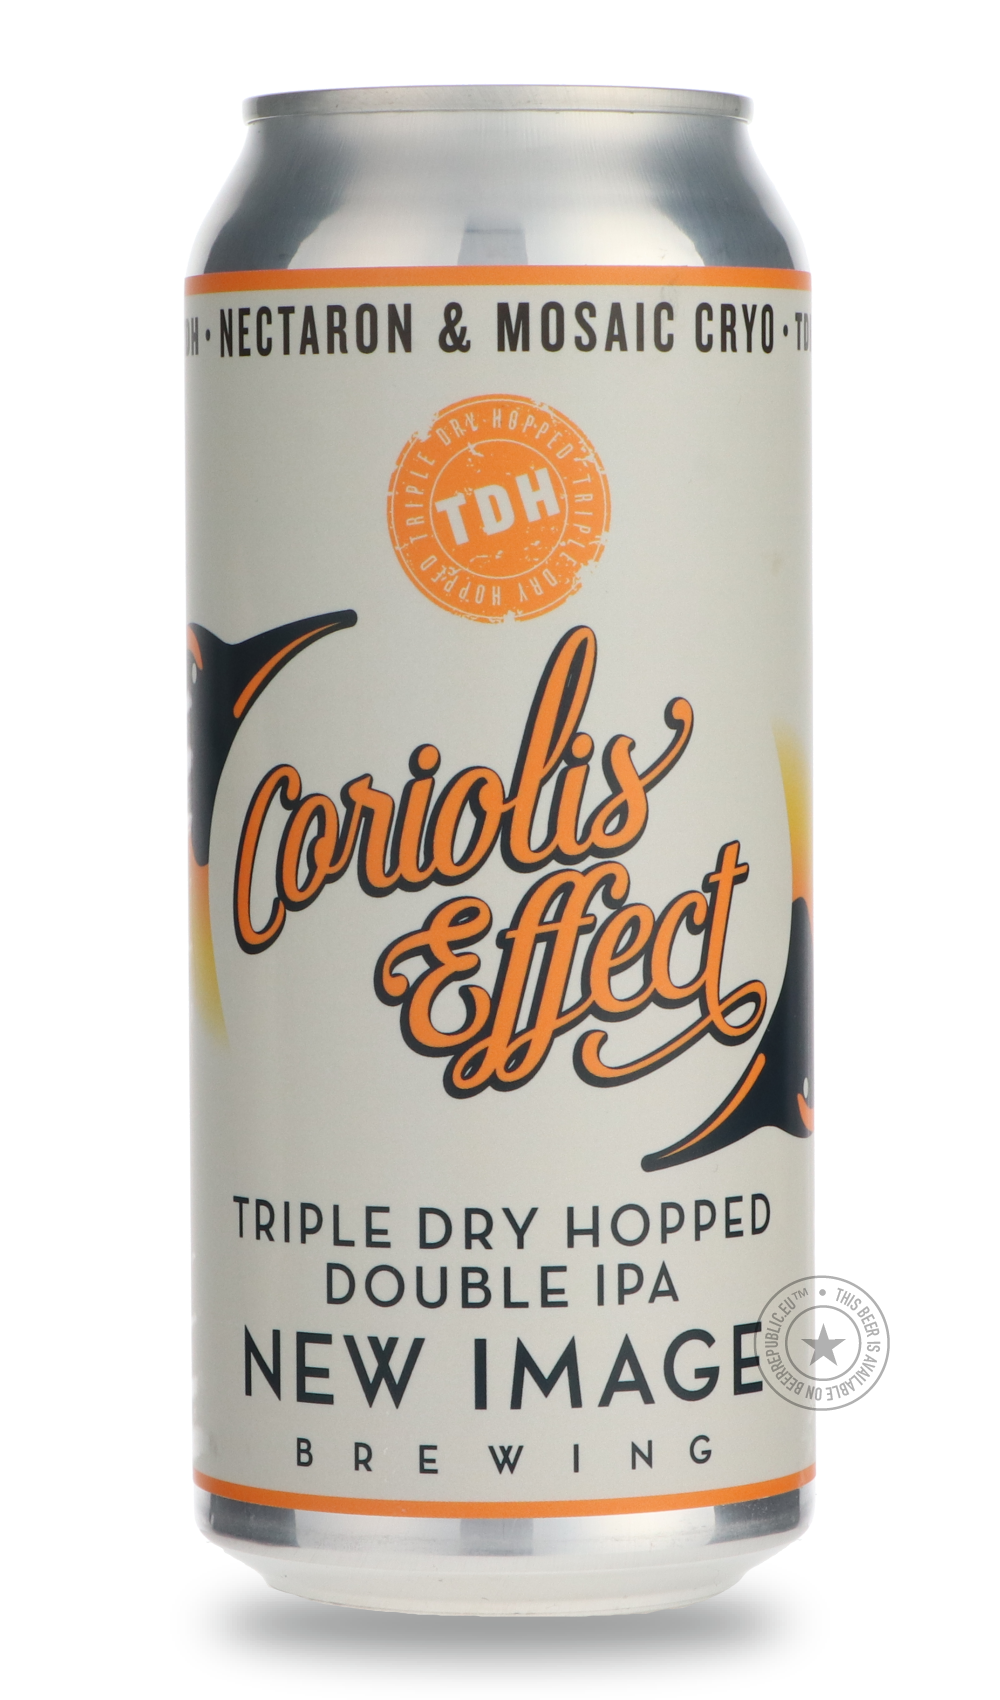 -New Image- TDH Coriolis Effect - Nectaron & Mosaic Cryo-IPA- Only @ Beer Republic - The best online beer store for American & Canadian craft beer - Buy beer online from the USA and Canada - Bier online kopen - Amerikaans bier kopen - Craft beer store - Craft beer kopen - Amerikanisch bier kaufen - Bier online kaufen - Acheter biere online - IPA - Stout - Porter - New England IPA - Hazy IPA - Imperial Stout - Barrel Aged - Barrel Aged Imperial Stout - Brown - Dark beer - Blond - Blonde - Pilsner - Lager - W